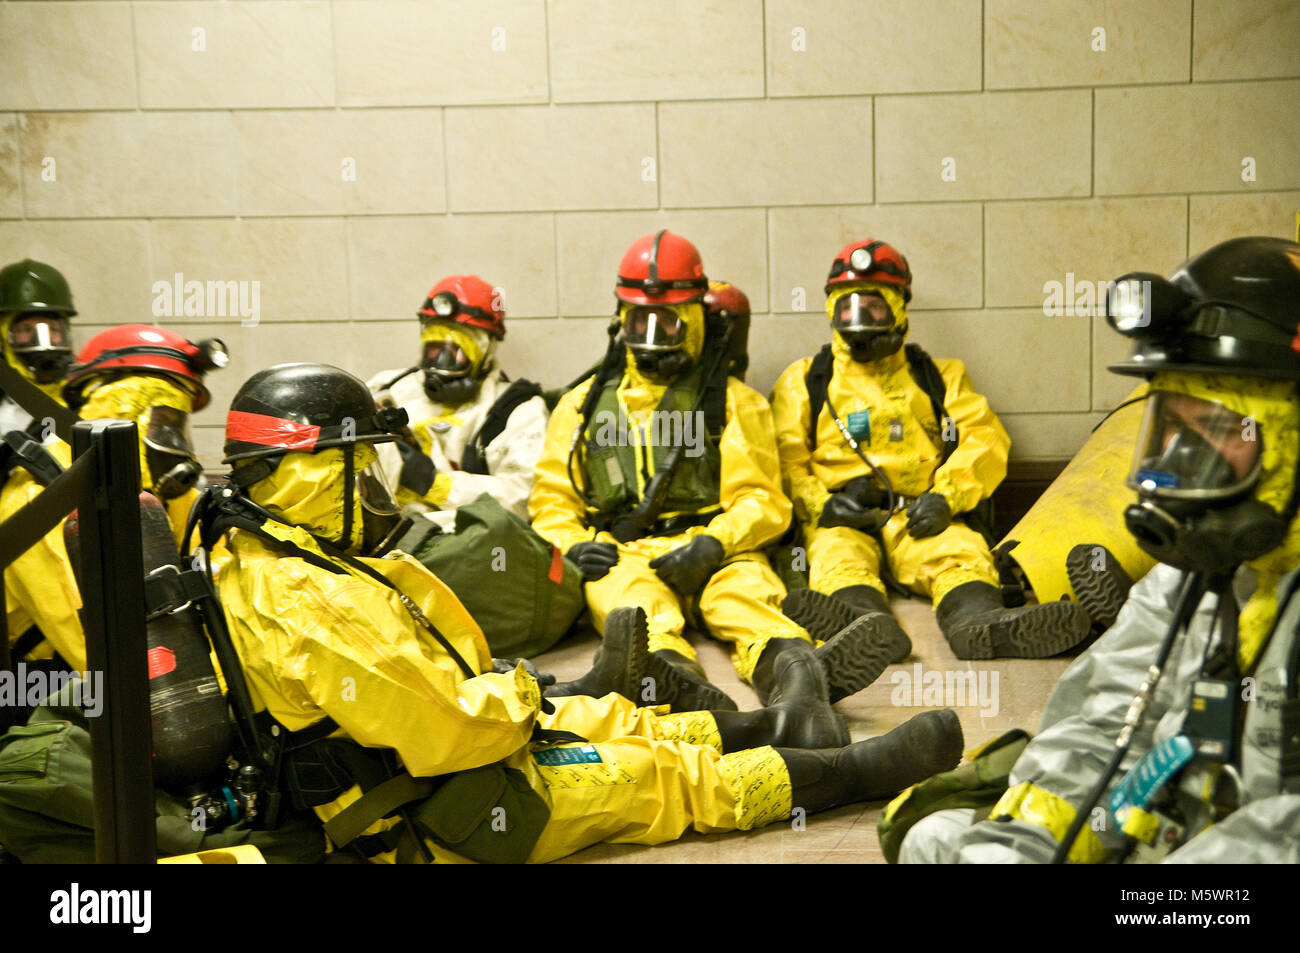 US Caoital Police Hazardous Material response team sits near the room where President Obama was giving his first State of the Union address.  The team was dressed in case there was an attack on or near the US Capital.  Capital Hill, Washington, D.C., February 24, 2009.  © Patsy Lynch /  MediaPunch Stock Photo